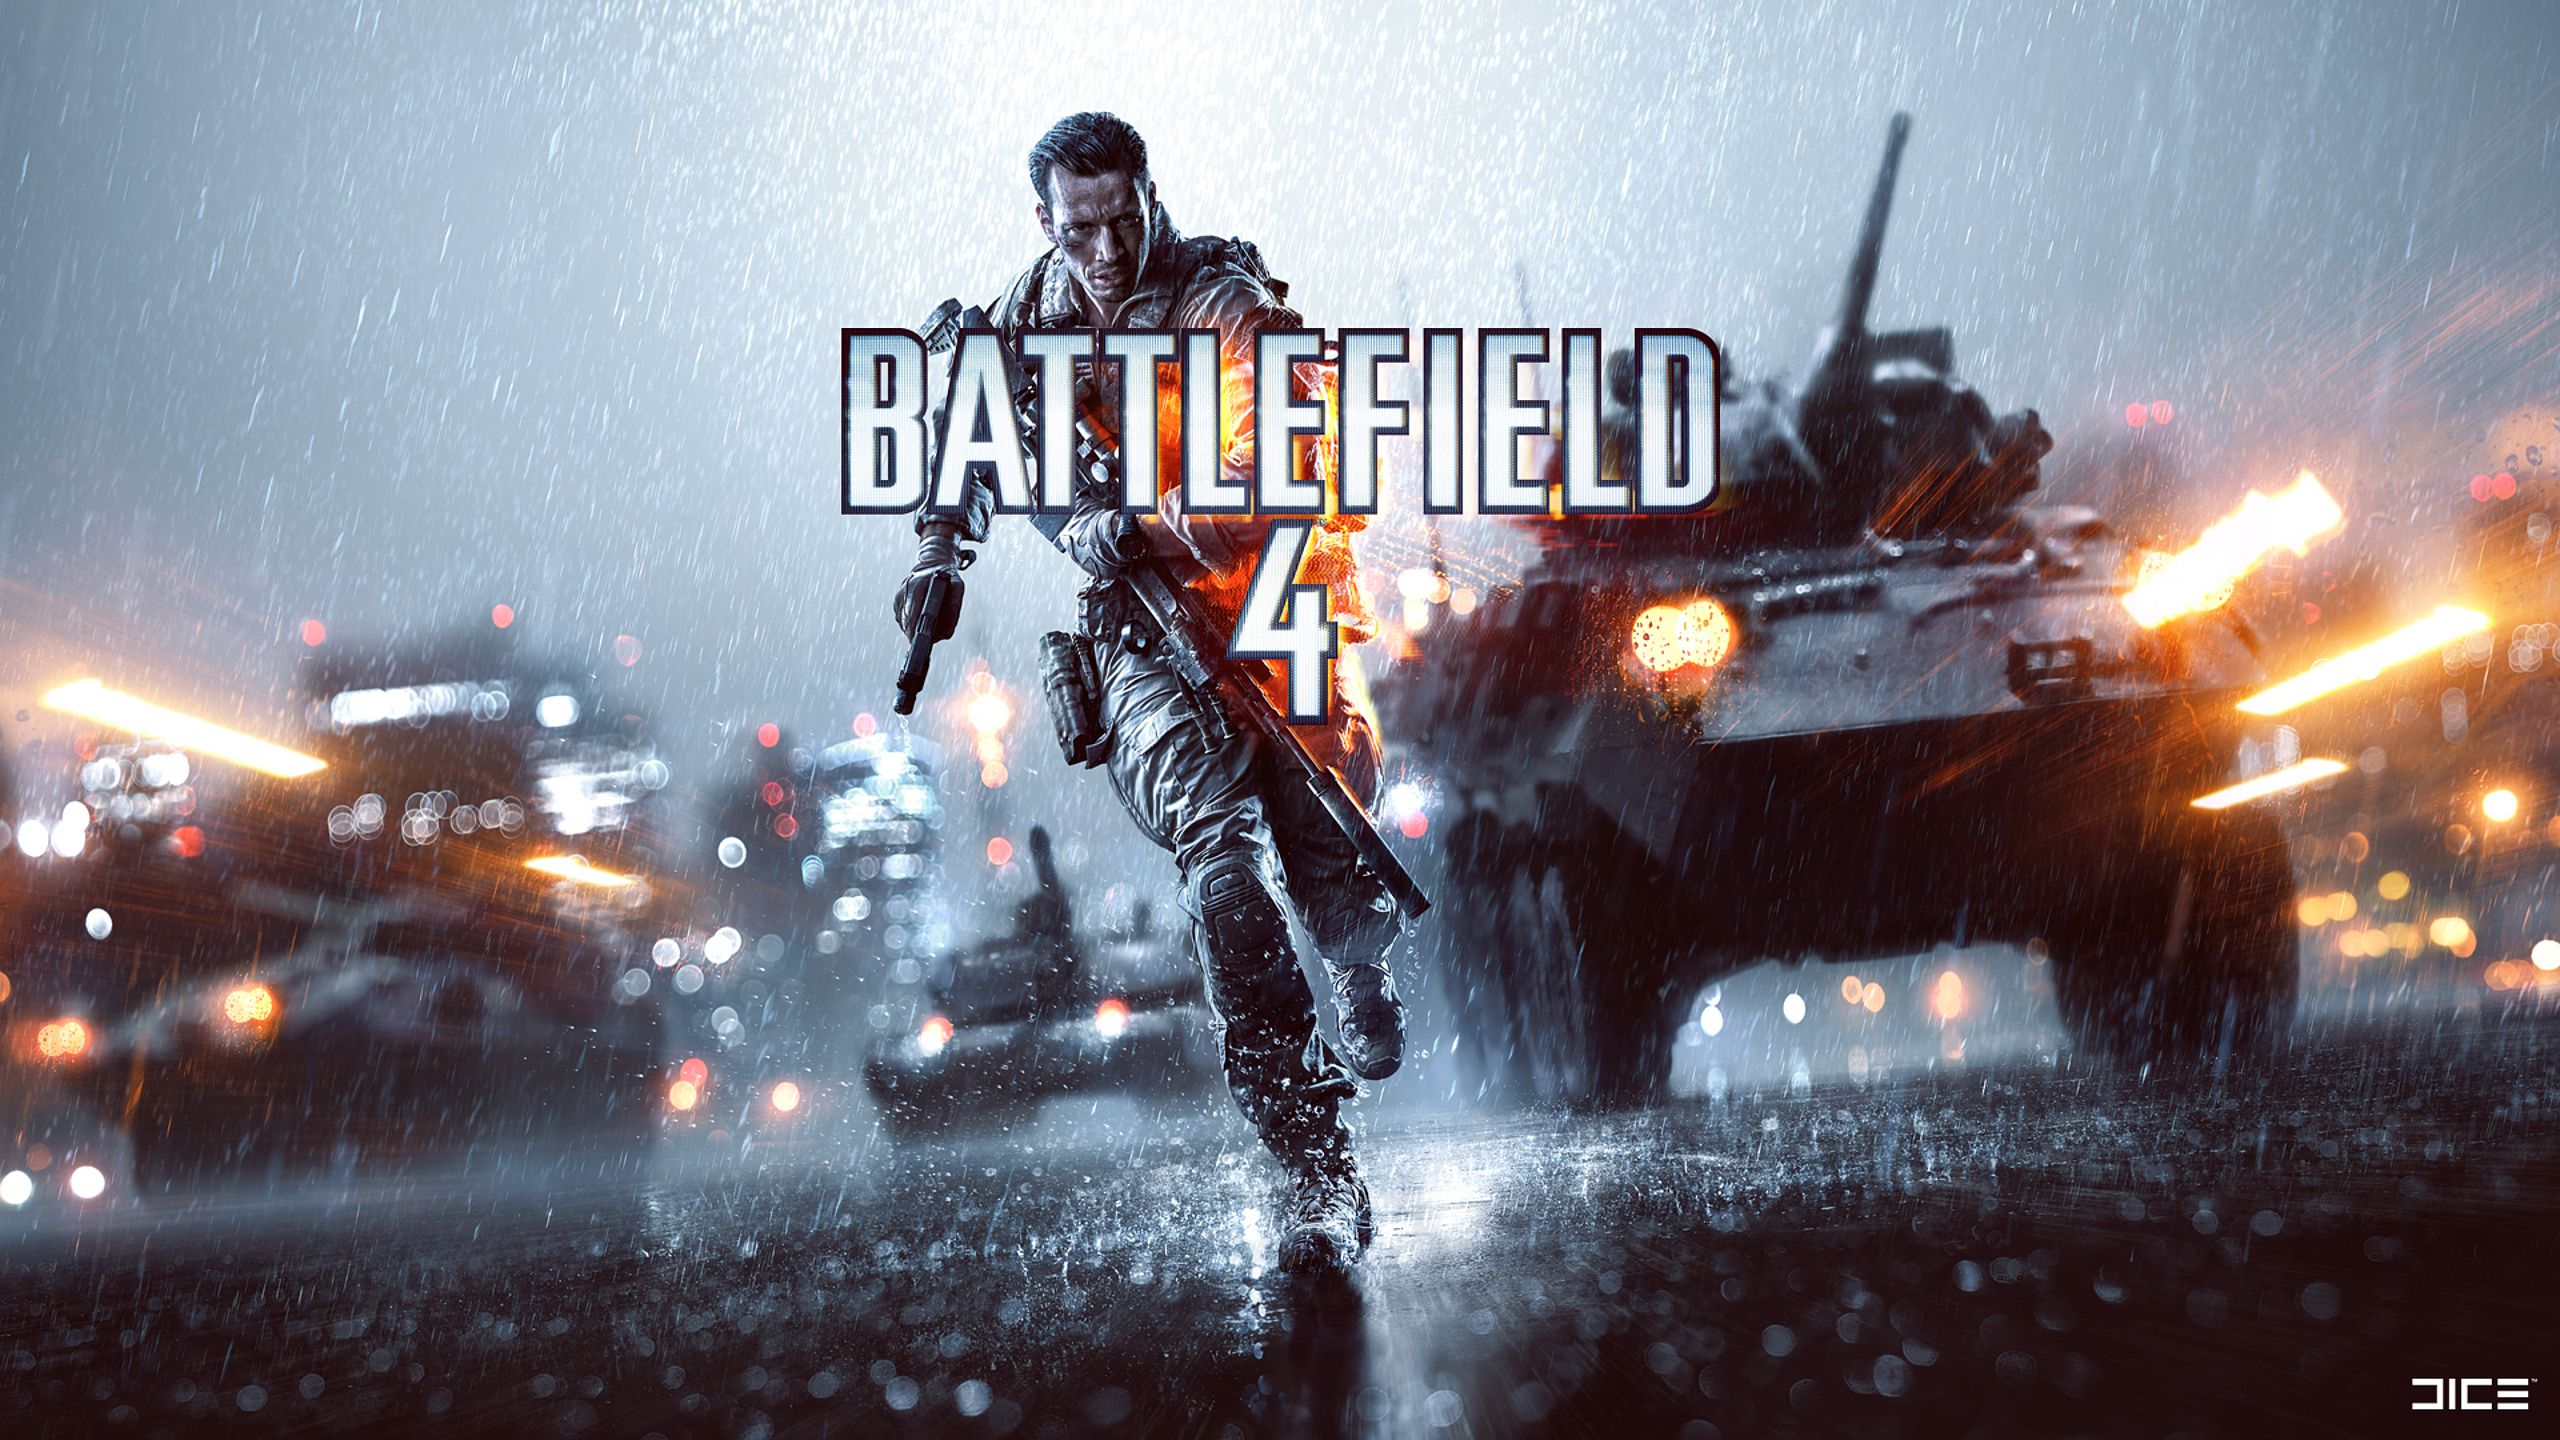 General 2560x1440 Battlefield (game) Battlefield 4 video games Electronic Arts EA DICE PC gaming video game art video game men gun weapon soldier vehicle tank